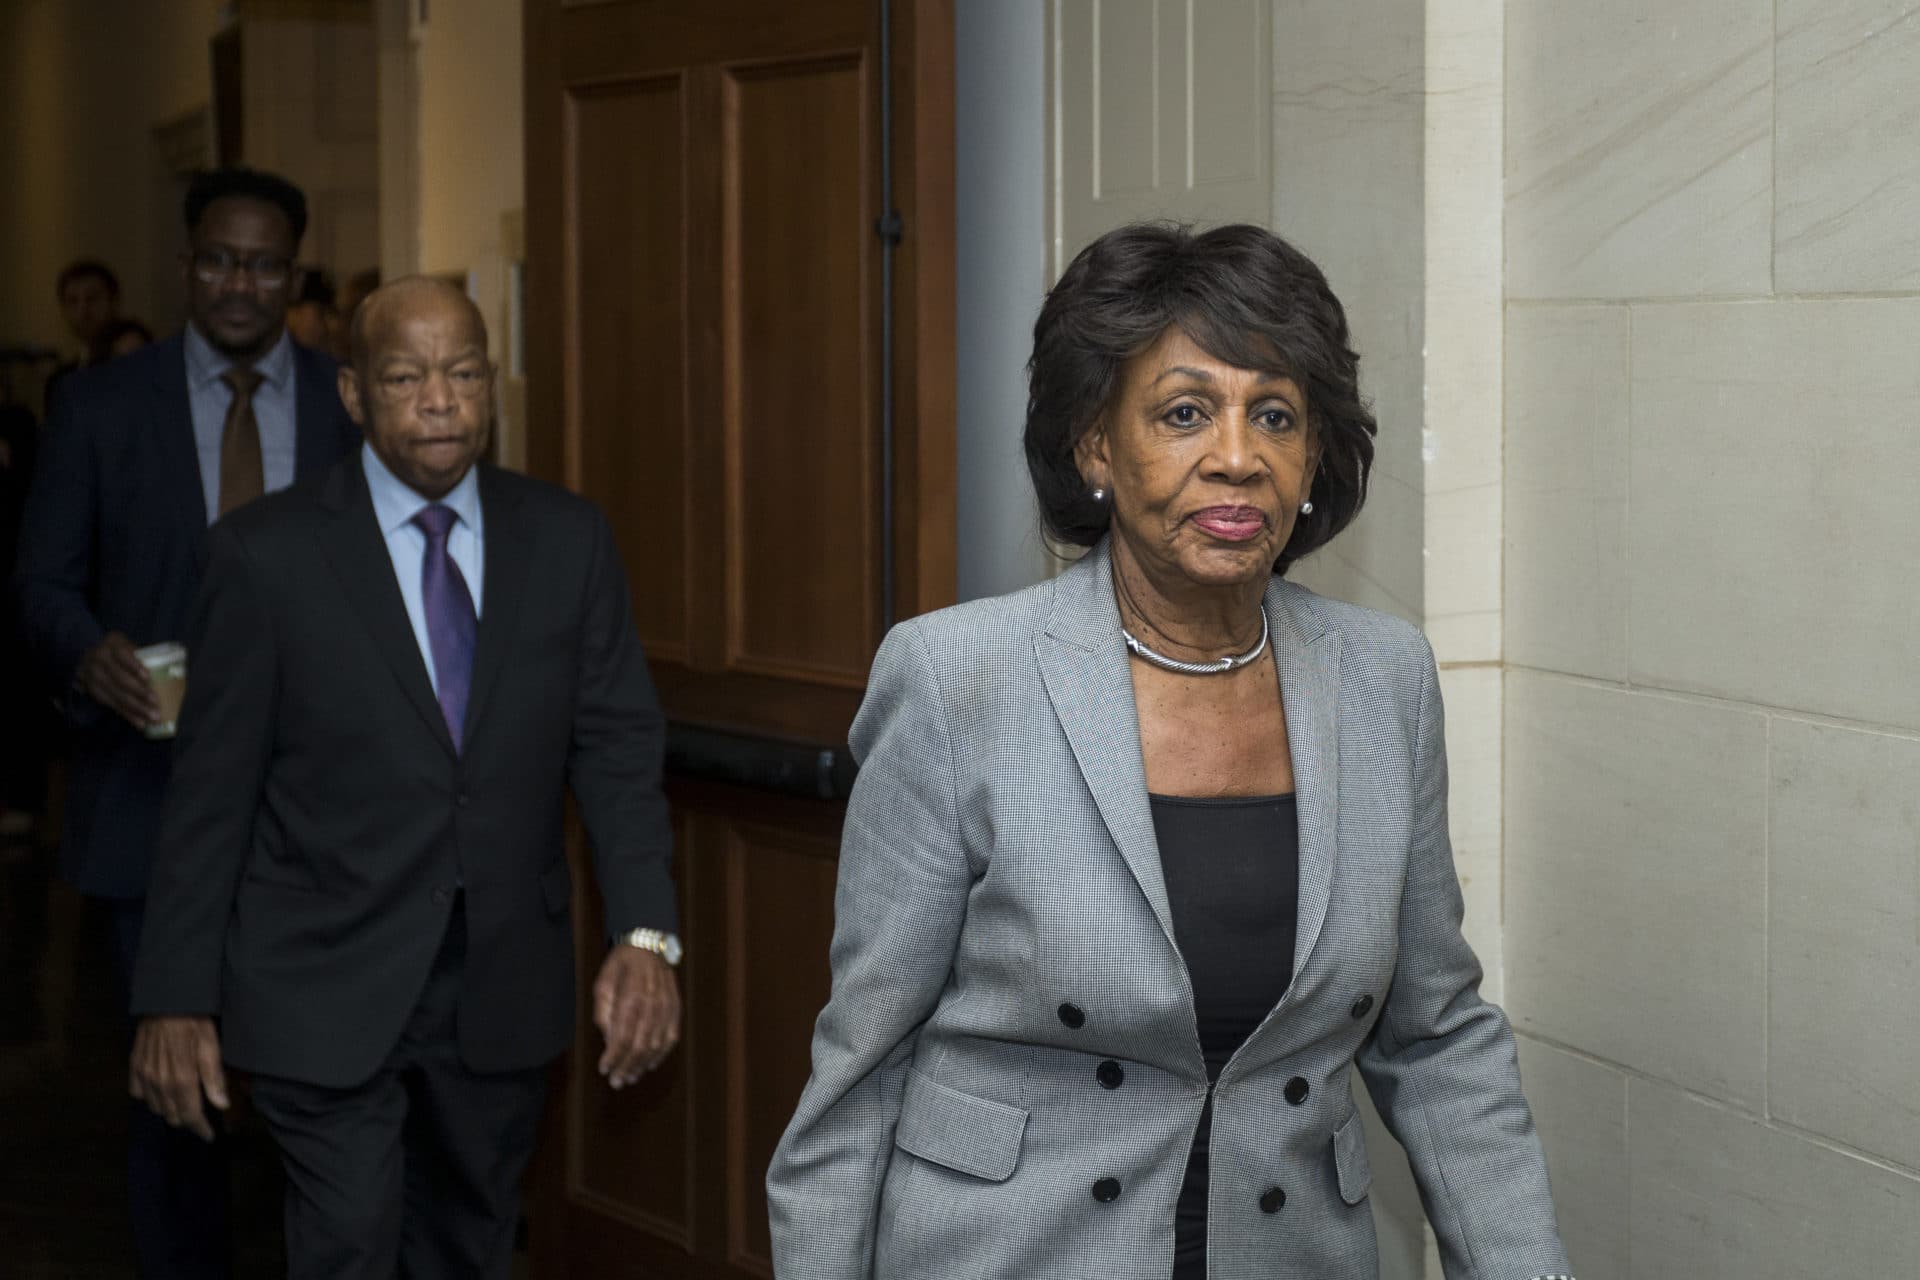 Rep. Maxine Waters Still Isn't Here For Trump's SOTU Address, While Other Democrats Remain Cautiously Hopeful